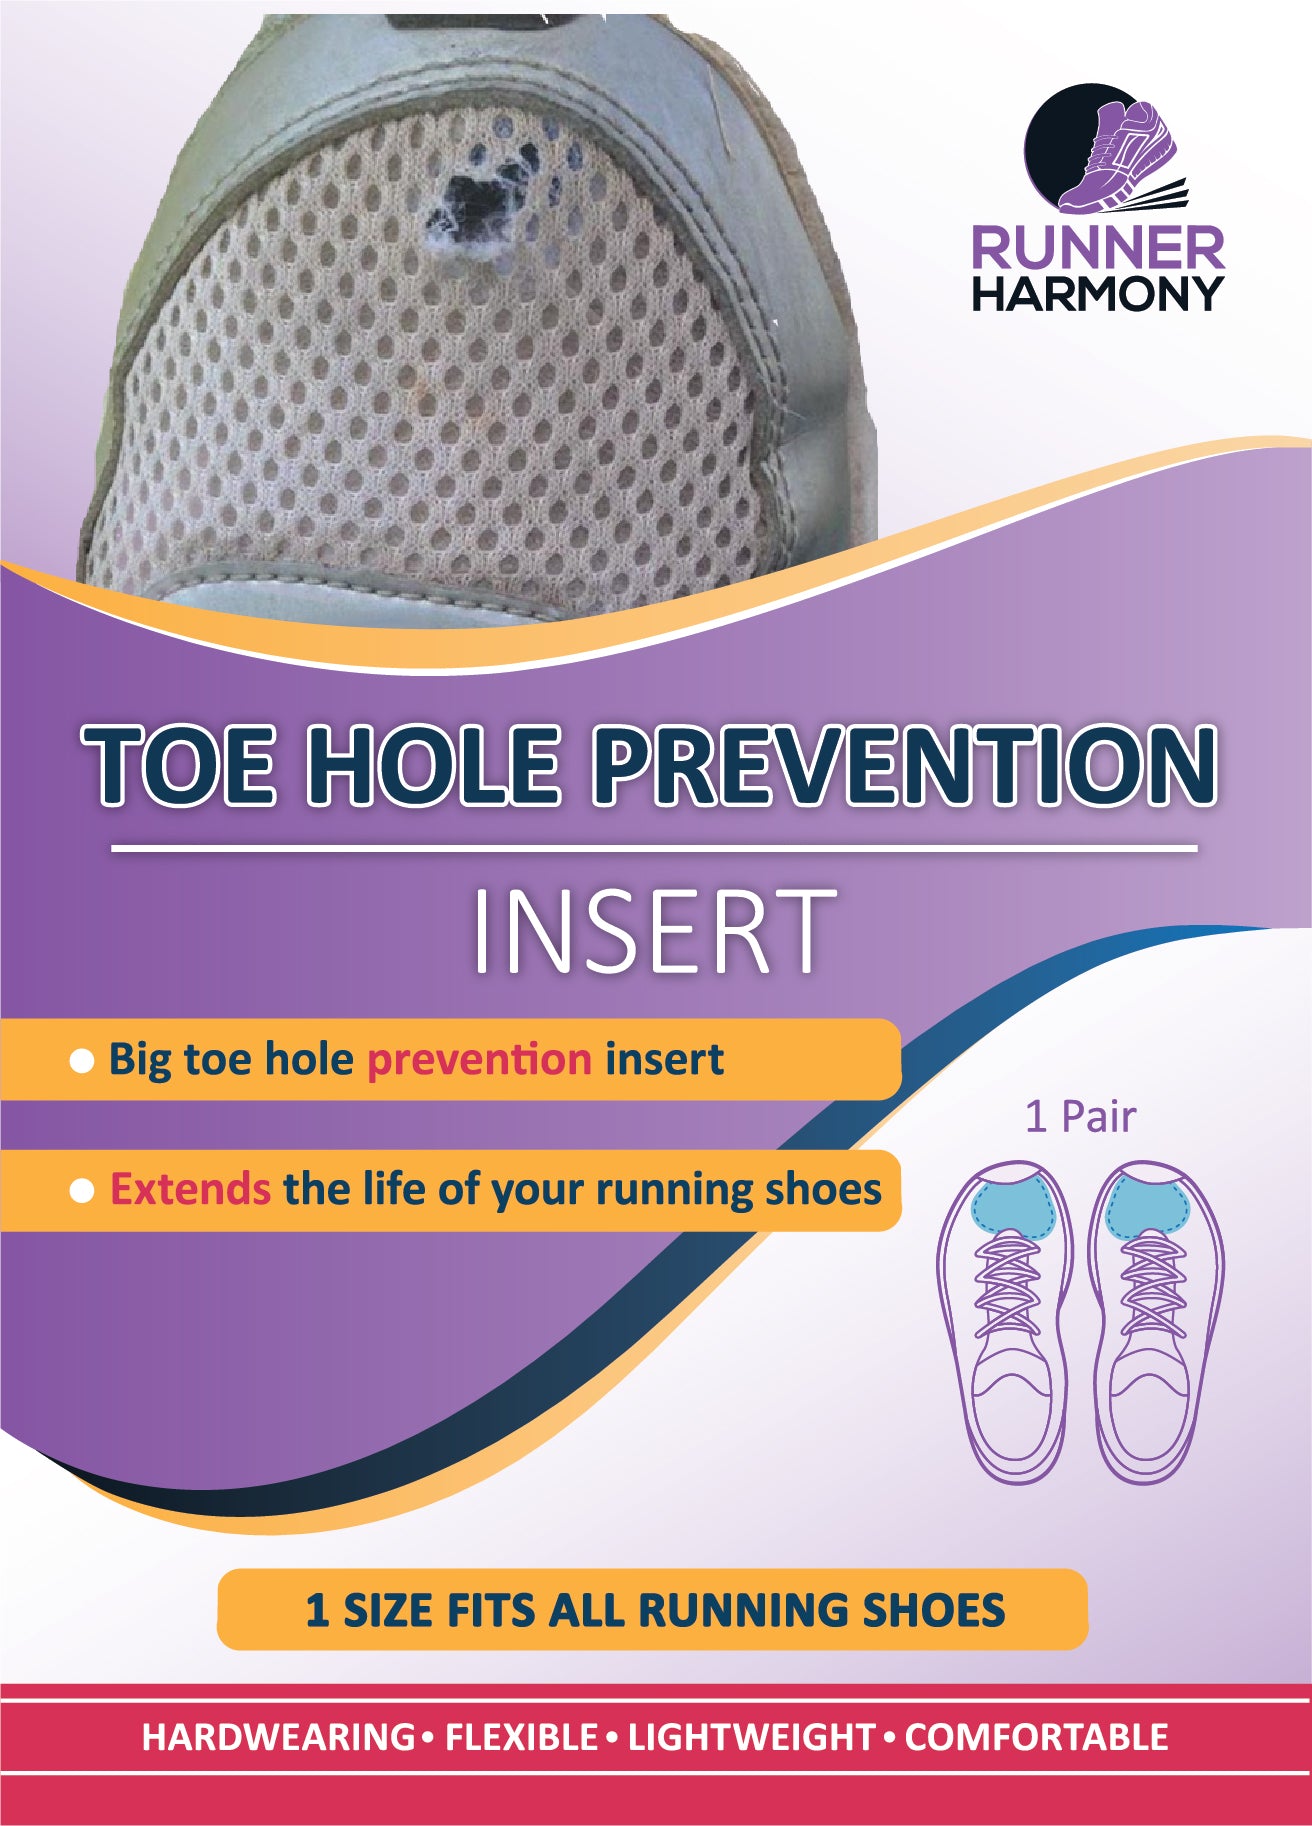 Mesh Shoe Hole Repair Patch Sticker for Toebox/Heel Hole Prevention Repair  